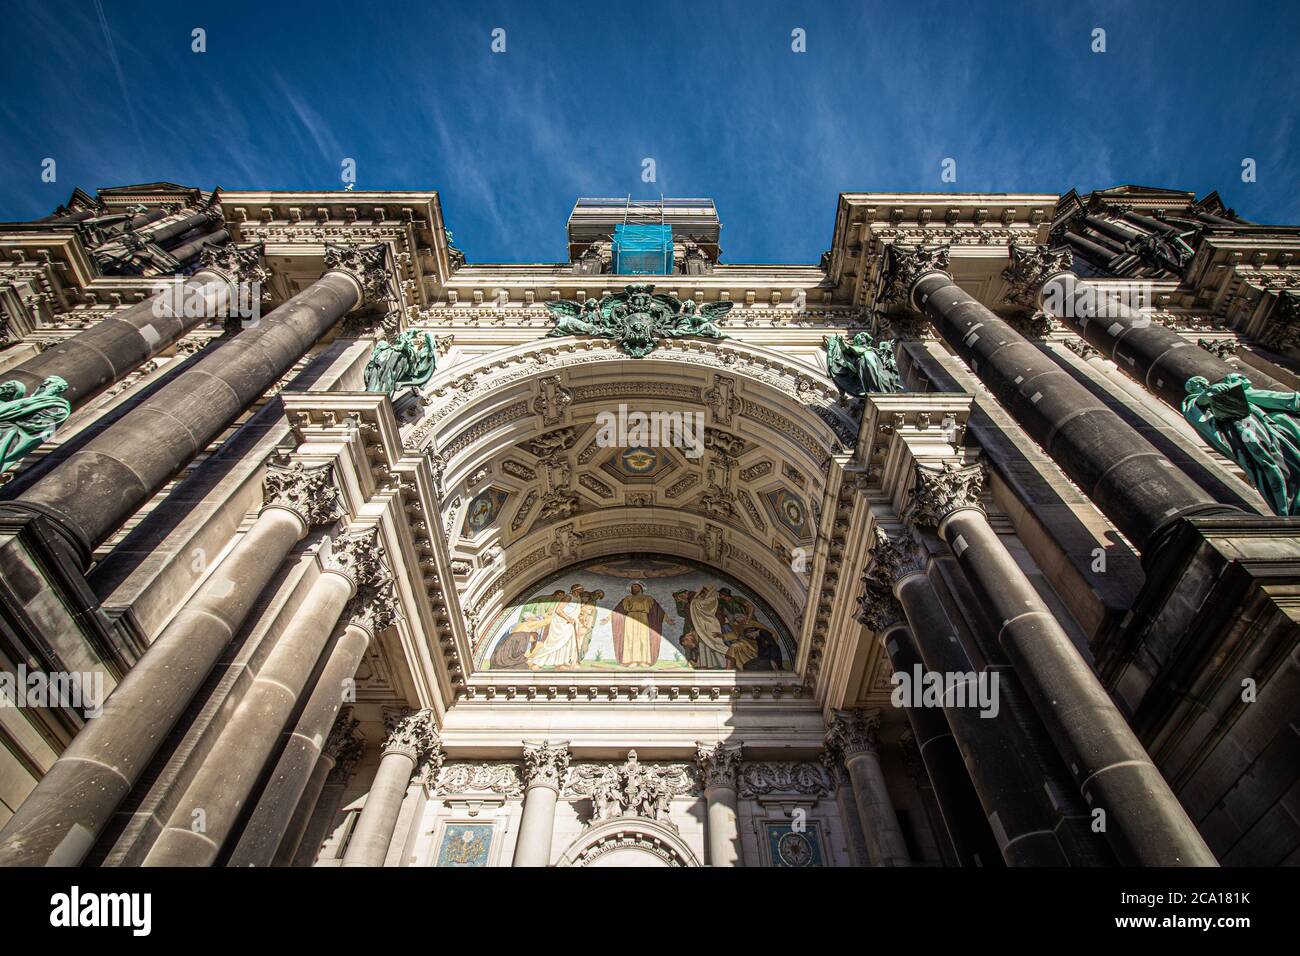 Facade of Berlin Cathedral (Berliner Dom) with Renaissance and Baroque Revival styles, in Berlin, Germany. Stock Photo